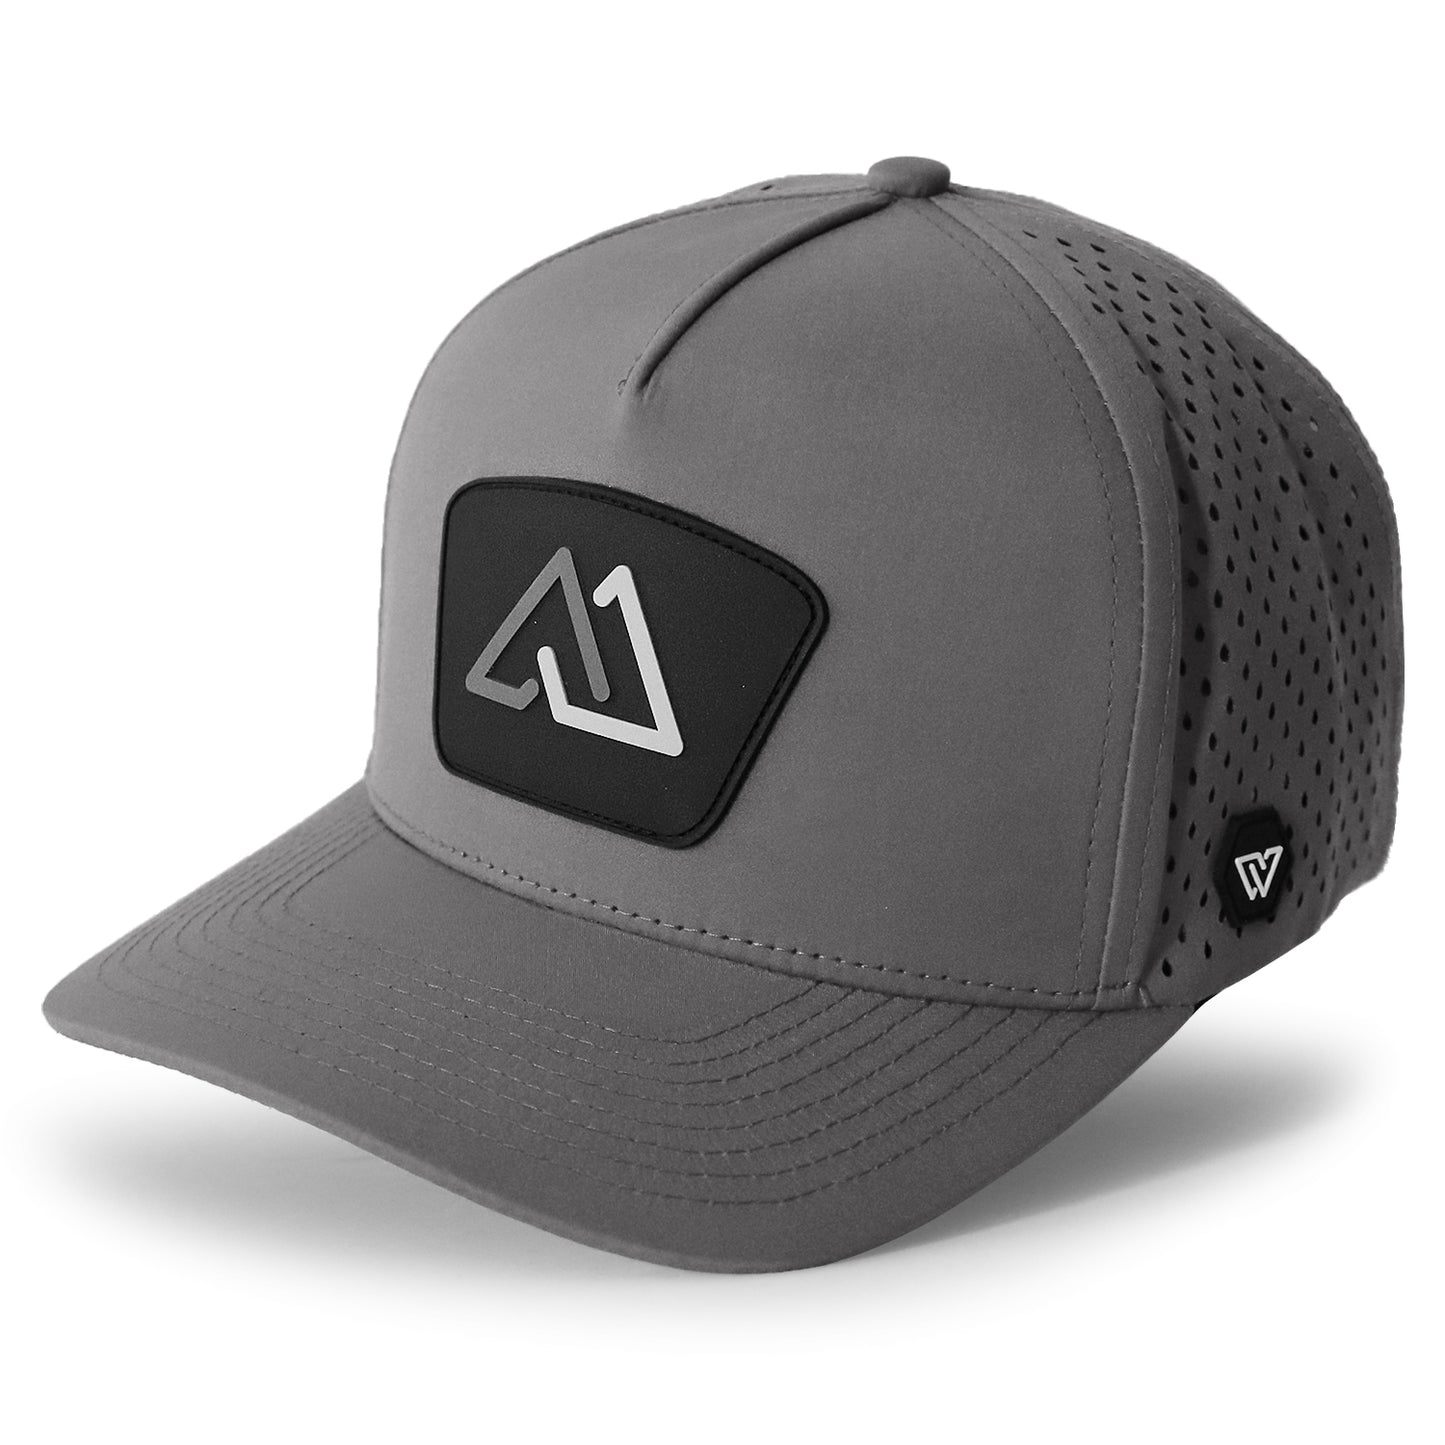 The Mountains - Performance hat